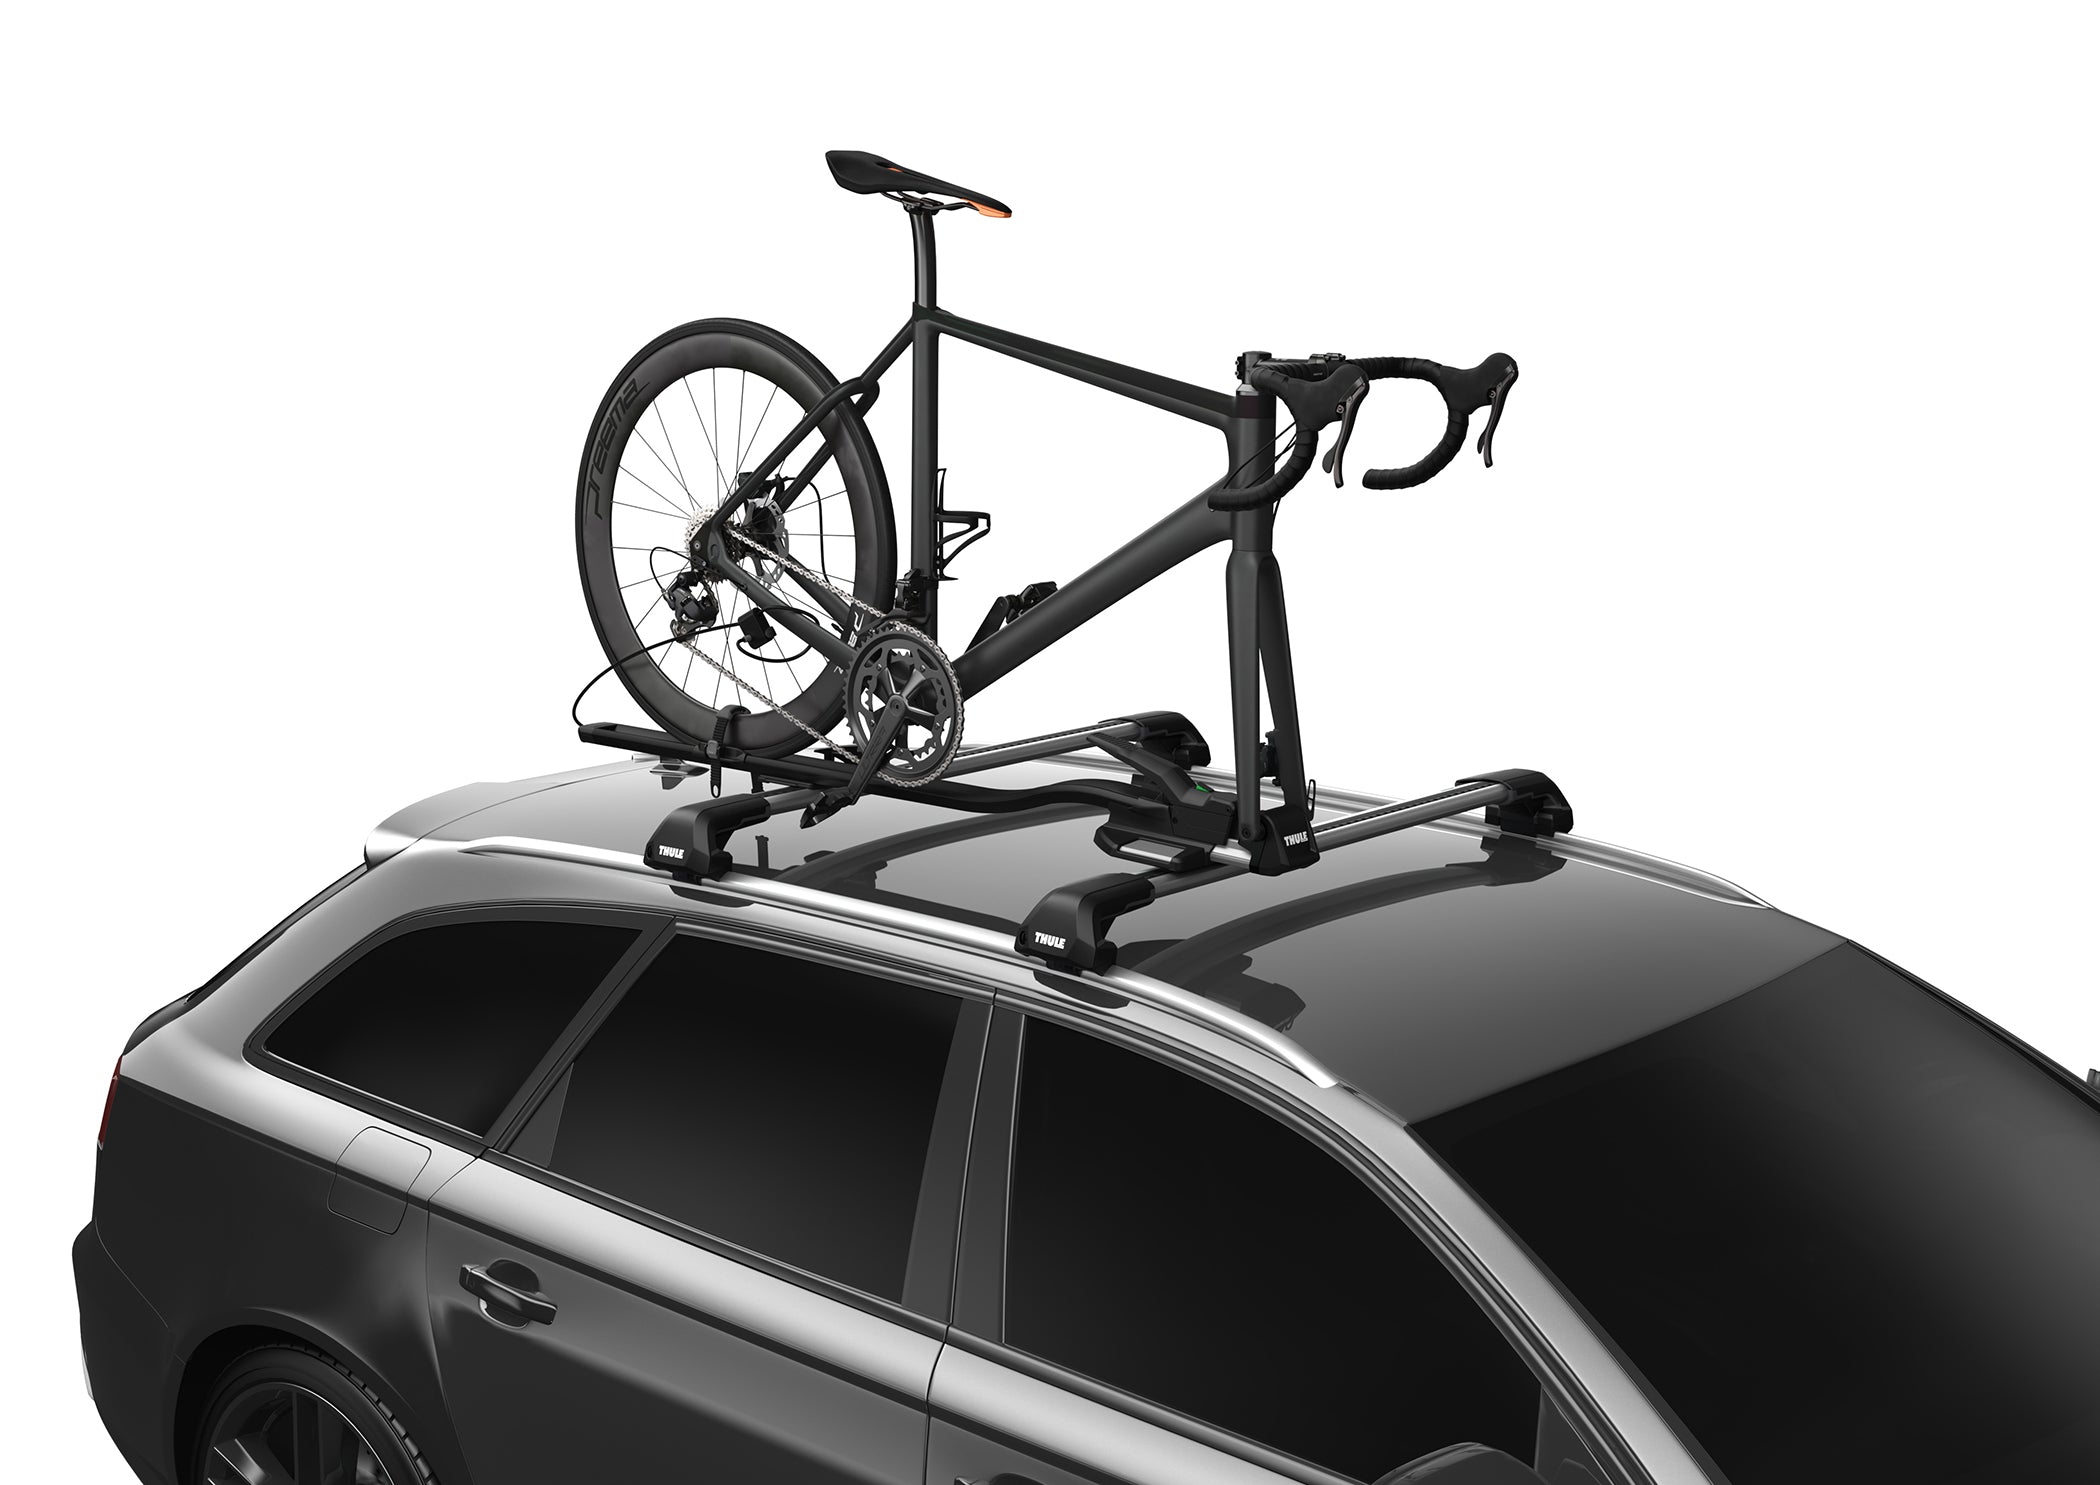 chef Spaans tijger Thule TopRide Roof Rack Fork Mount | The Pro's Closet